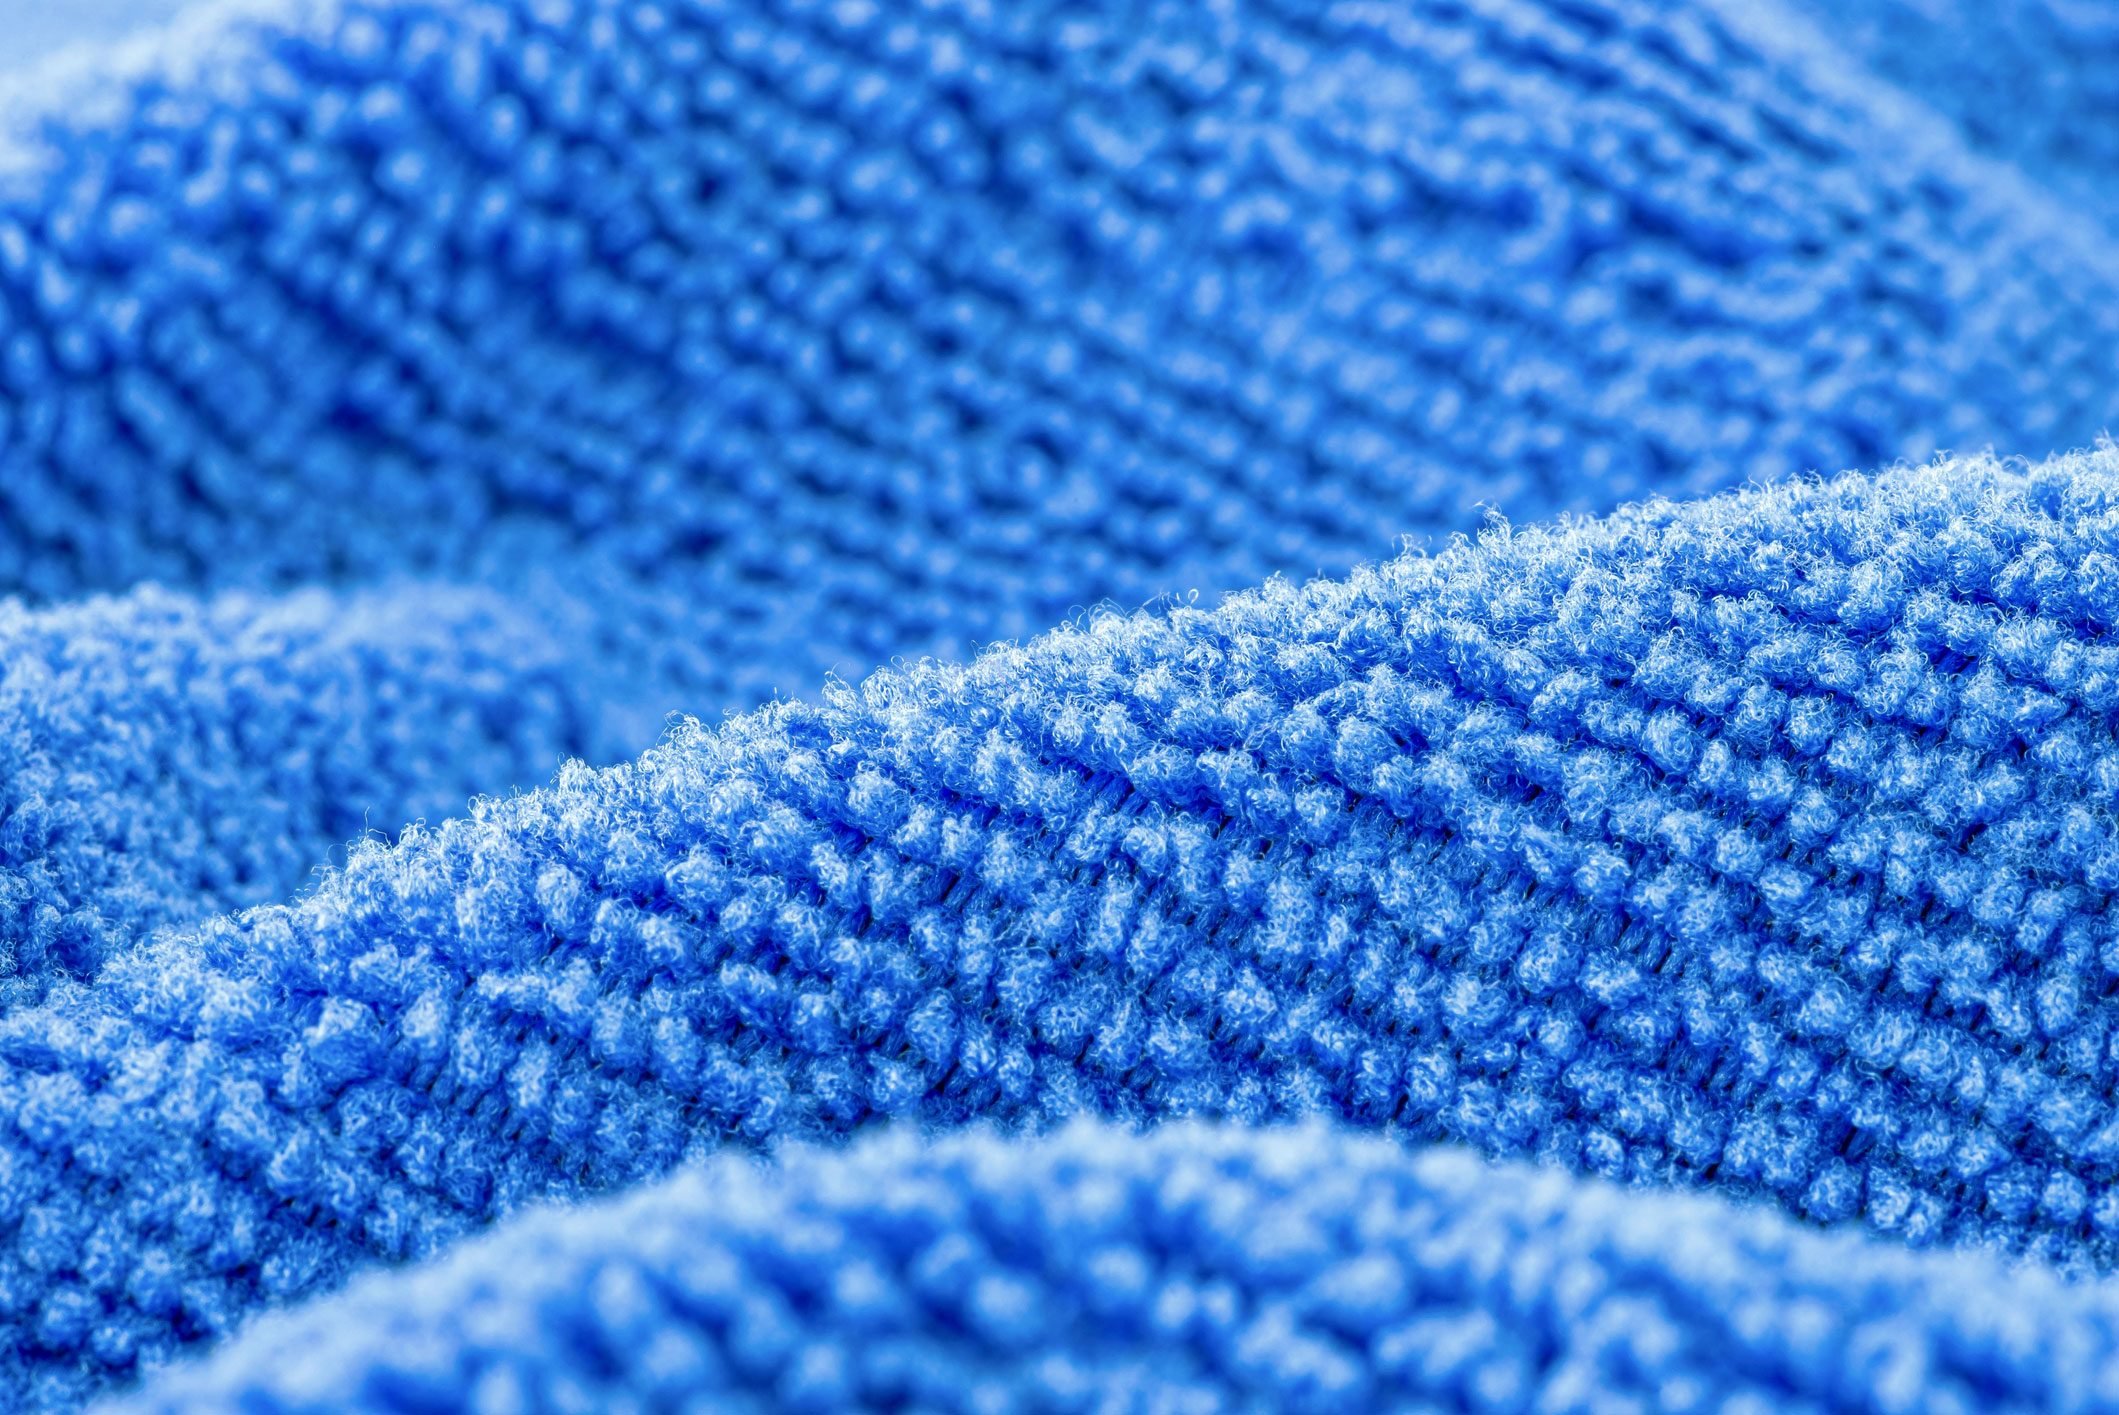 How to Wash Microfiber Towels Correctly — And Make Them Last Longer